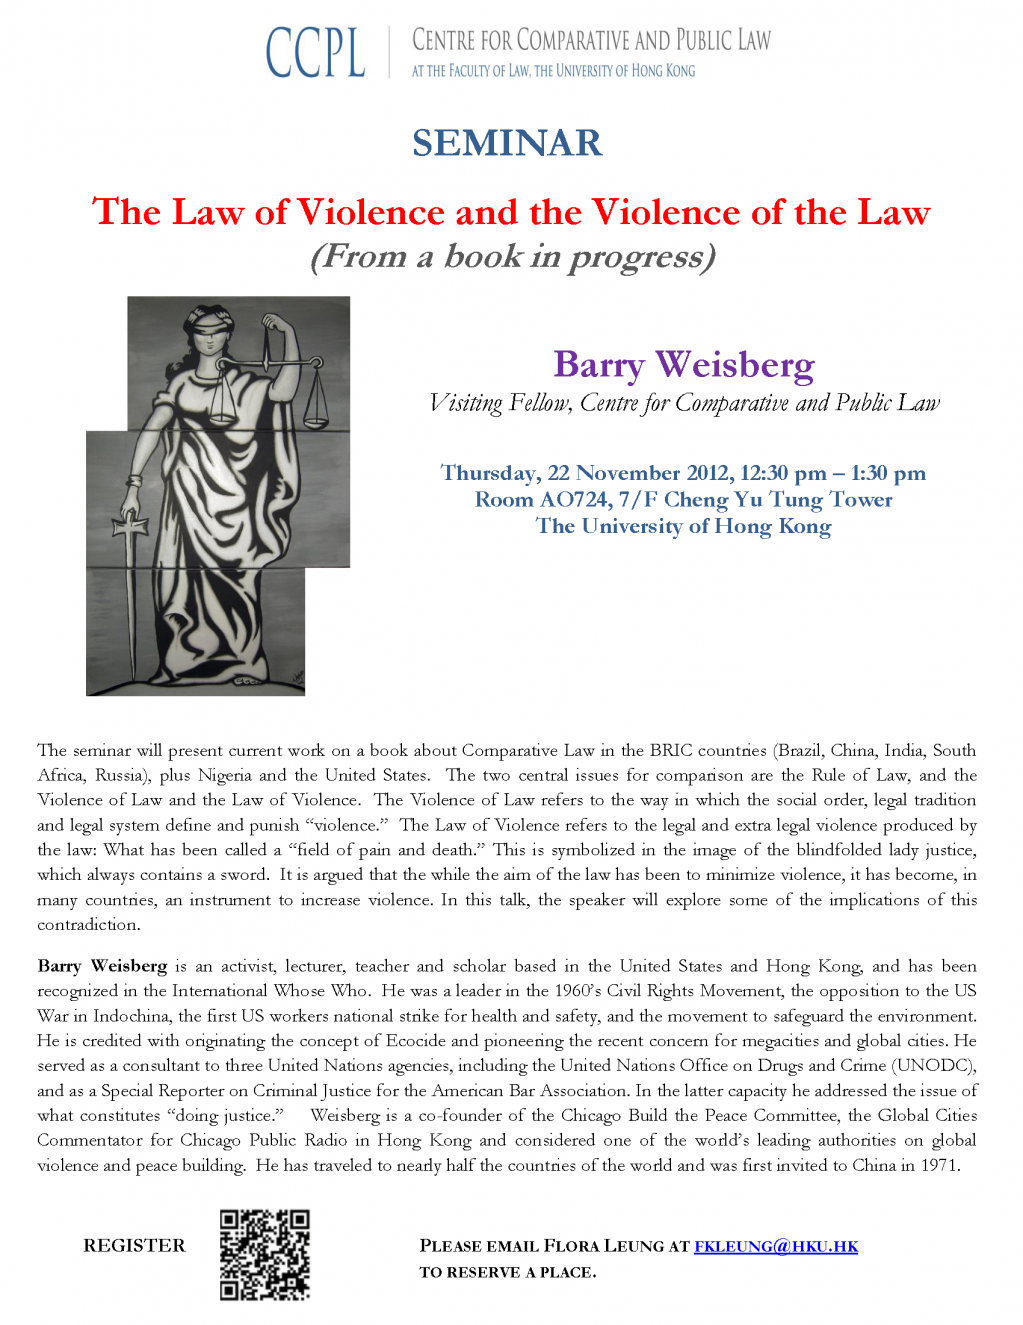 Seminar: The Law of Violence and the Violence of the Law